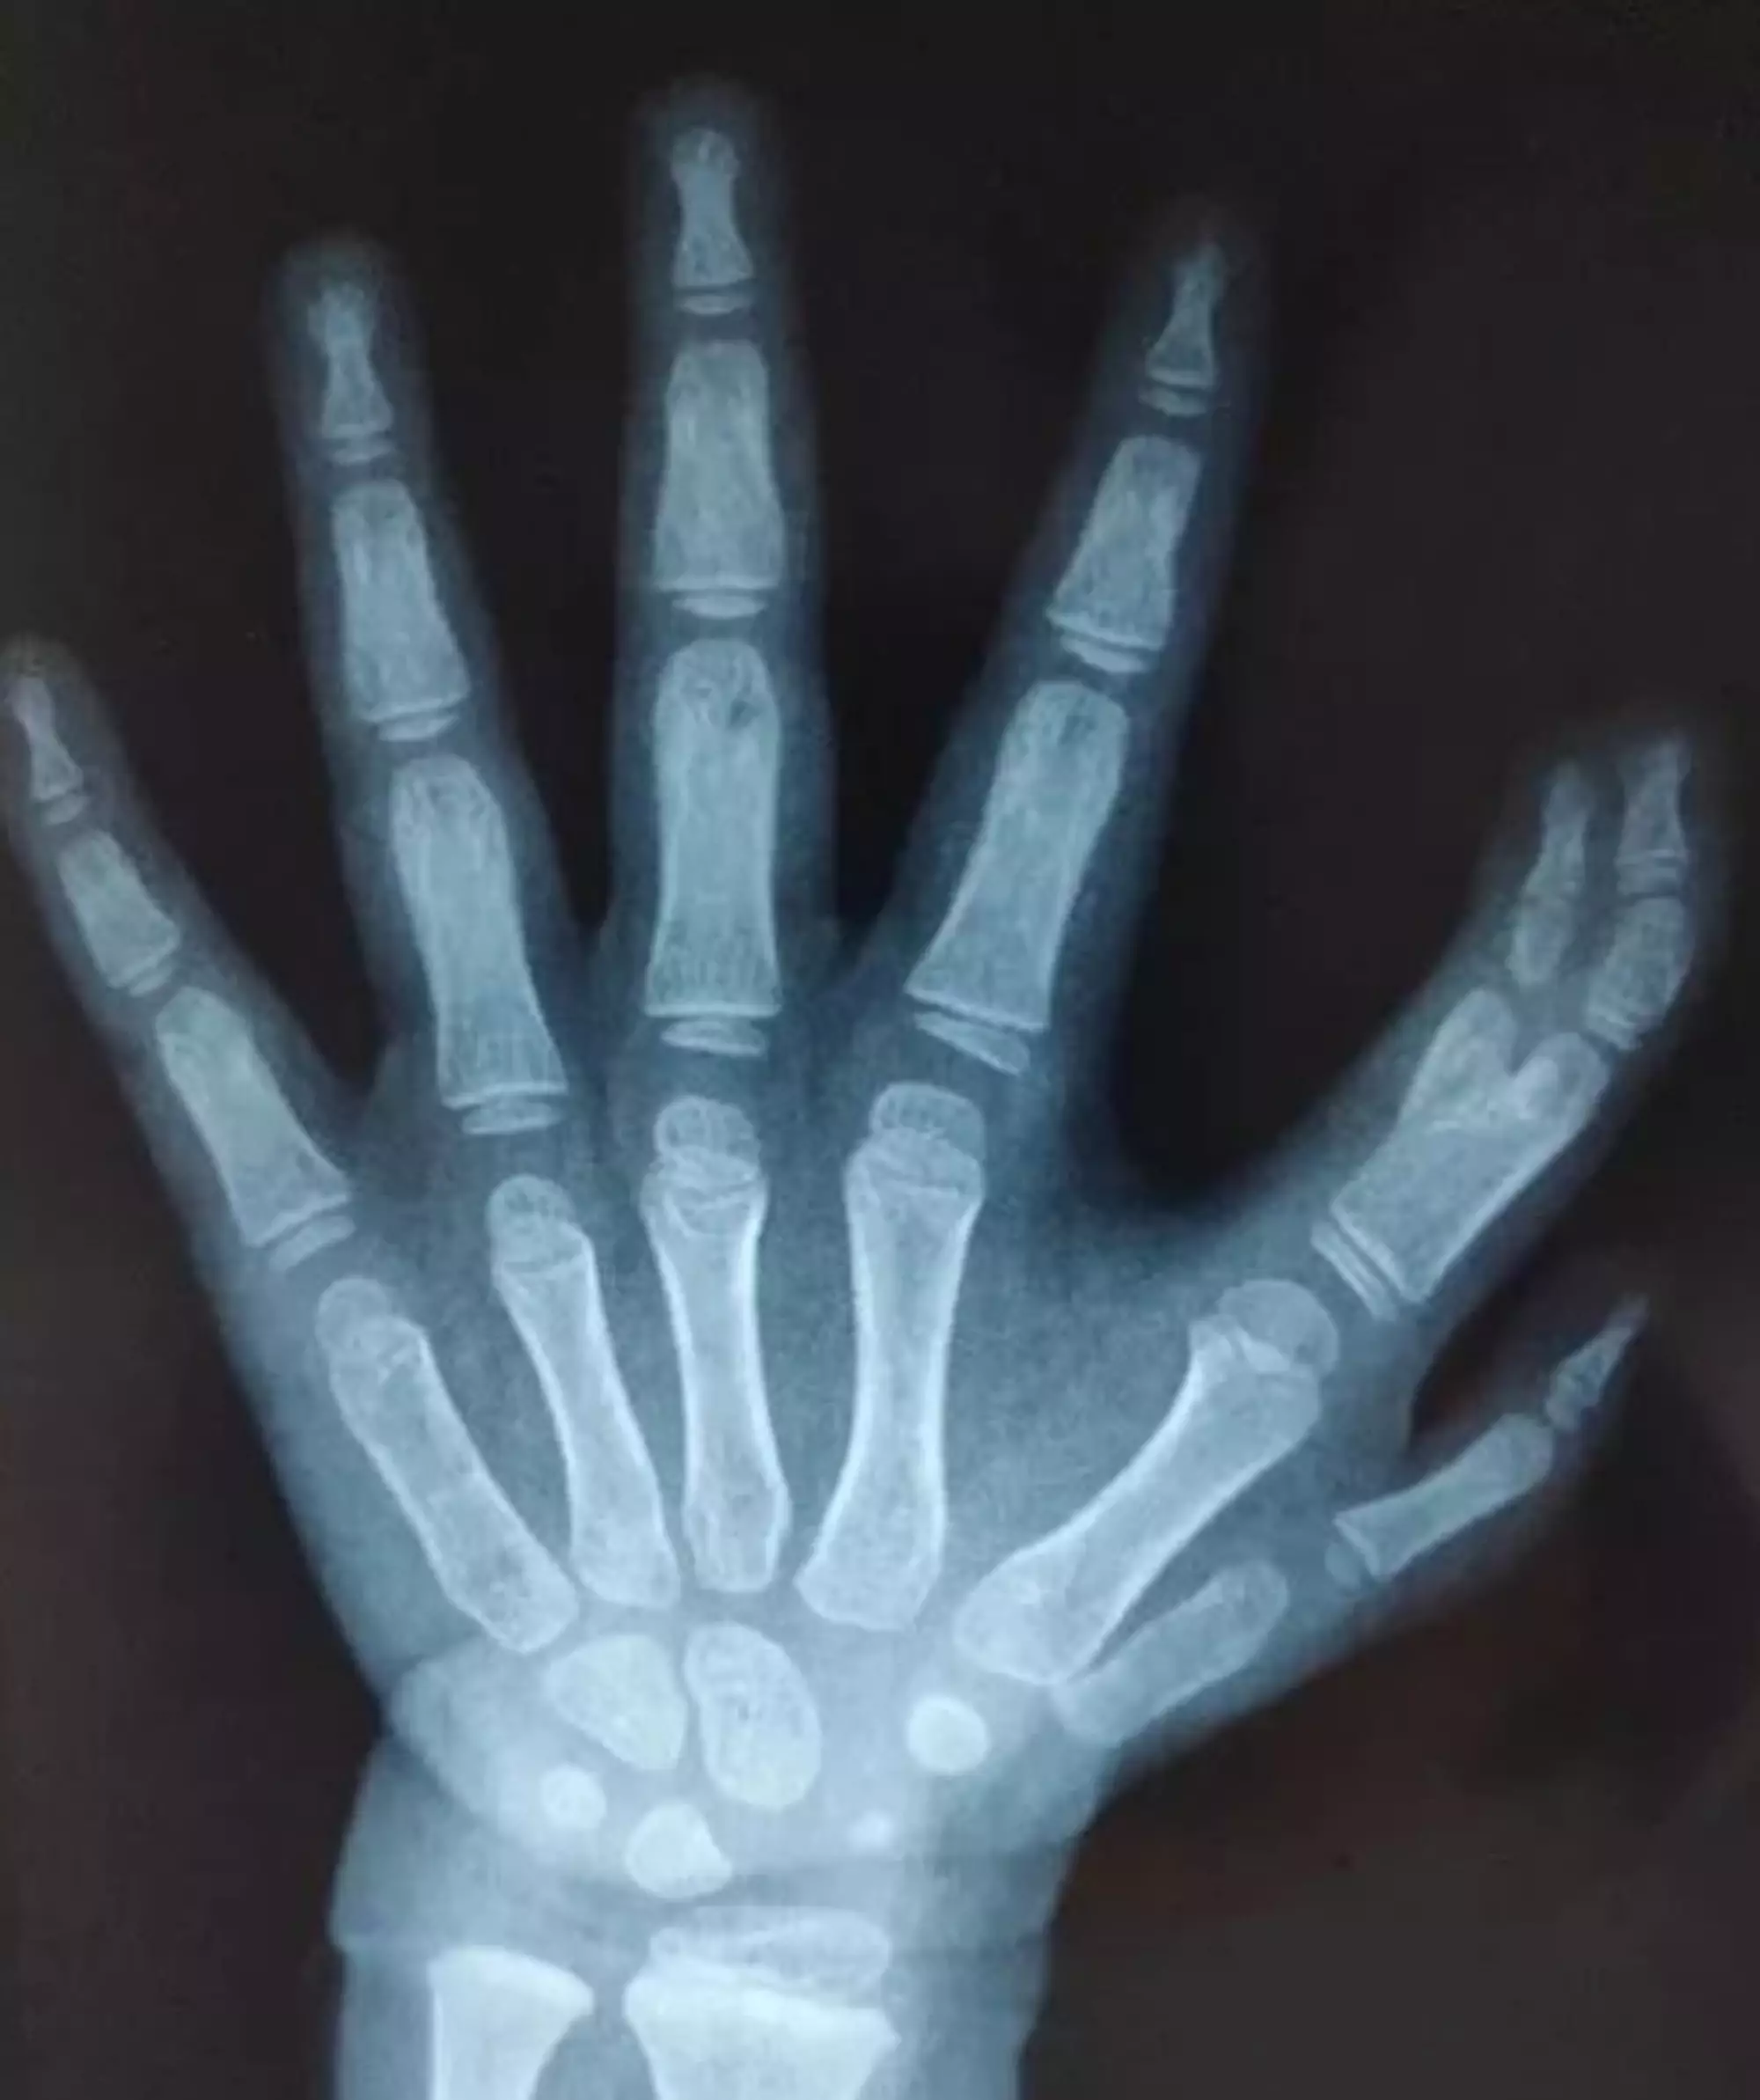 Girl Born With Too Many Fingers Has Extra Digits Surgically Removed